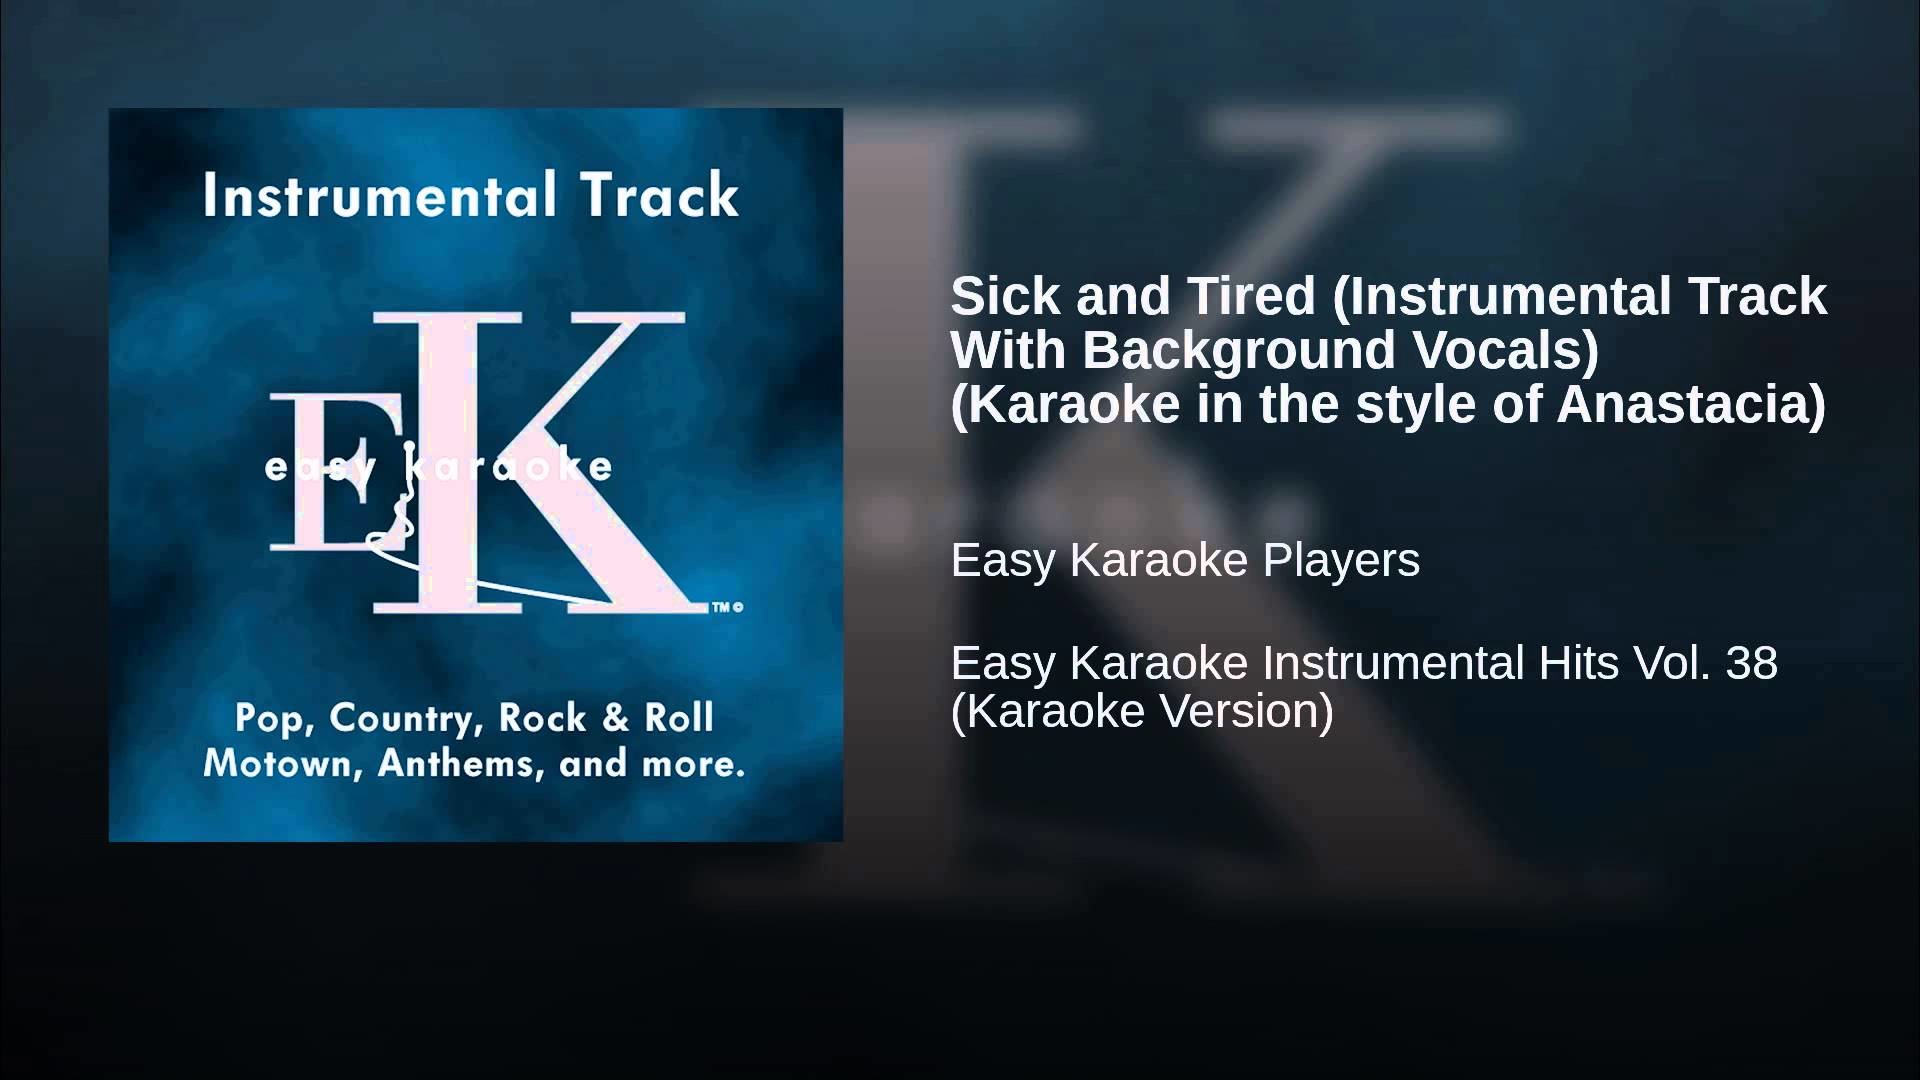 1920x1080 Sick and Tired (Instrumental Track With Background Vocals) (Karaoke in the  style of Anastacia)